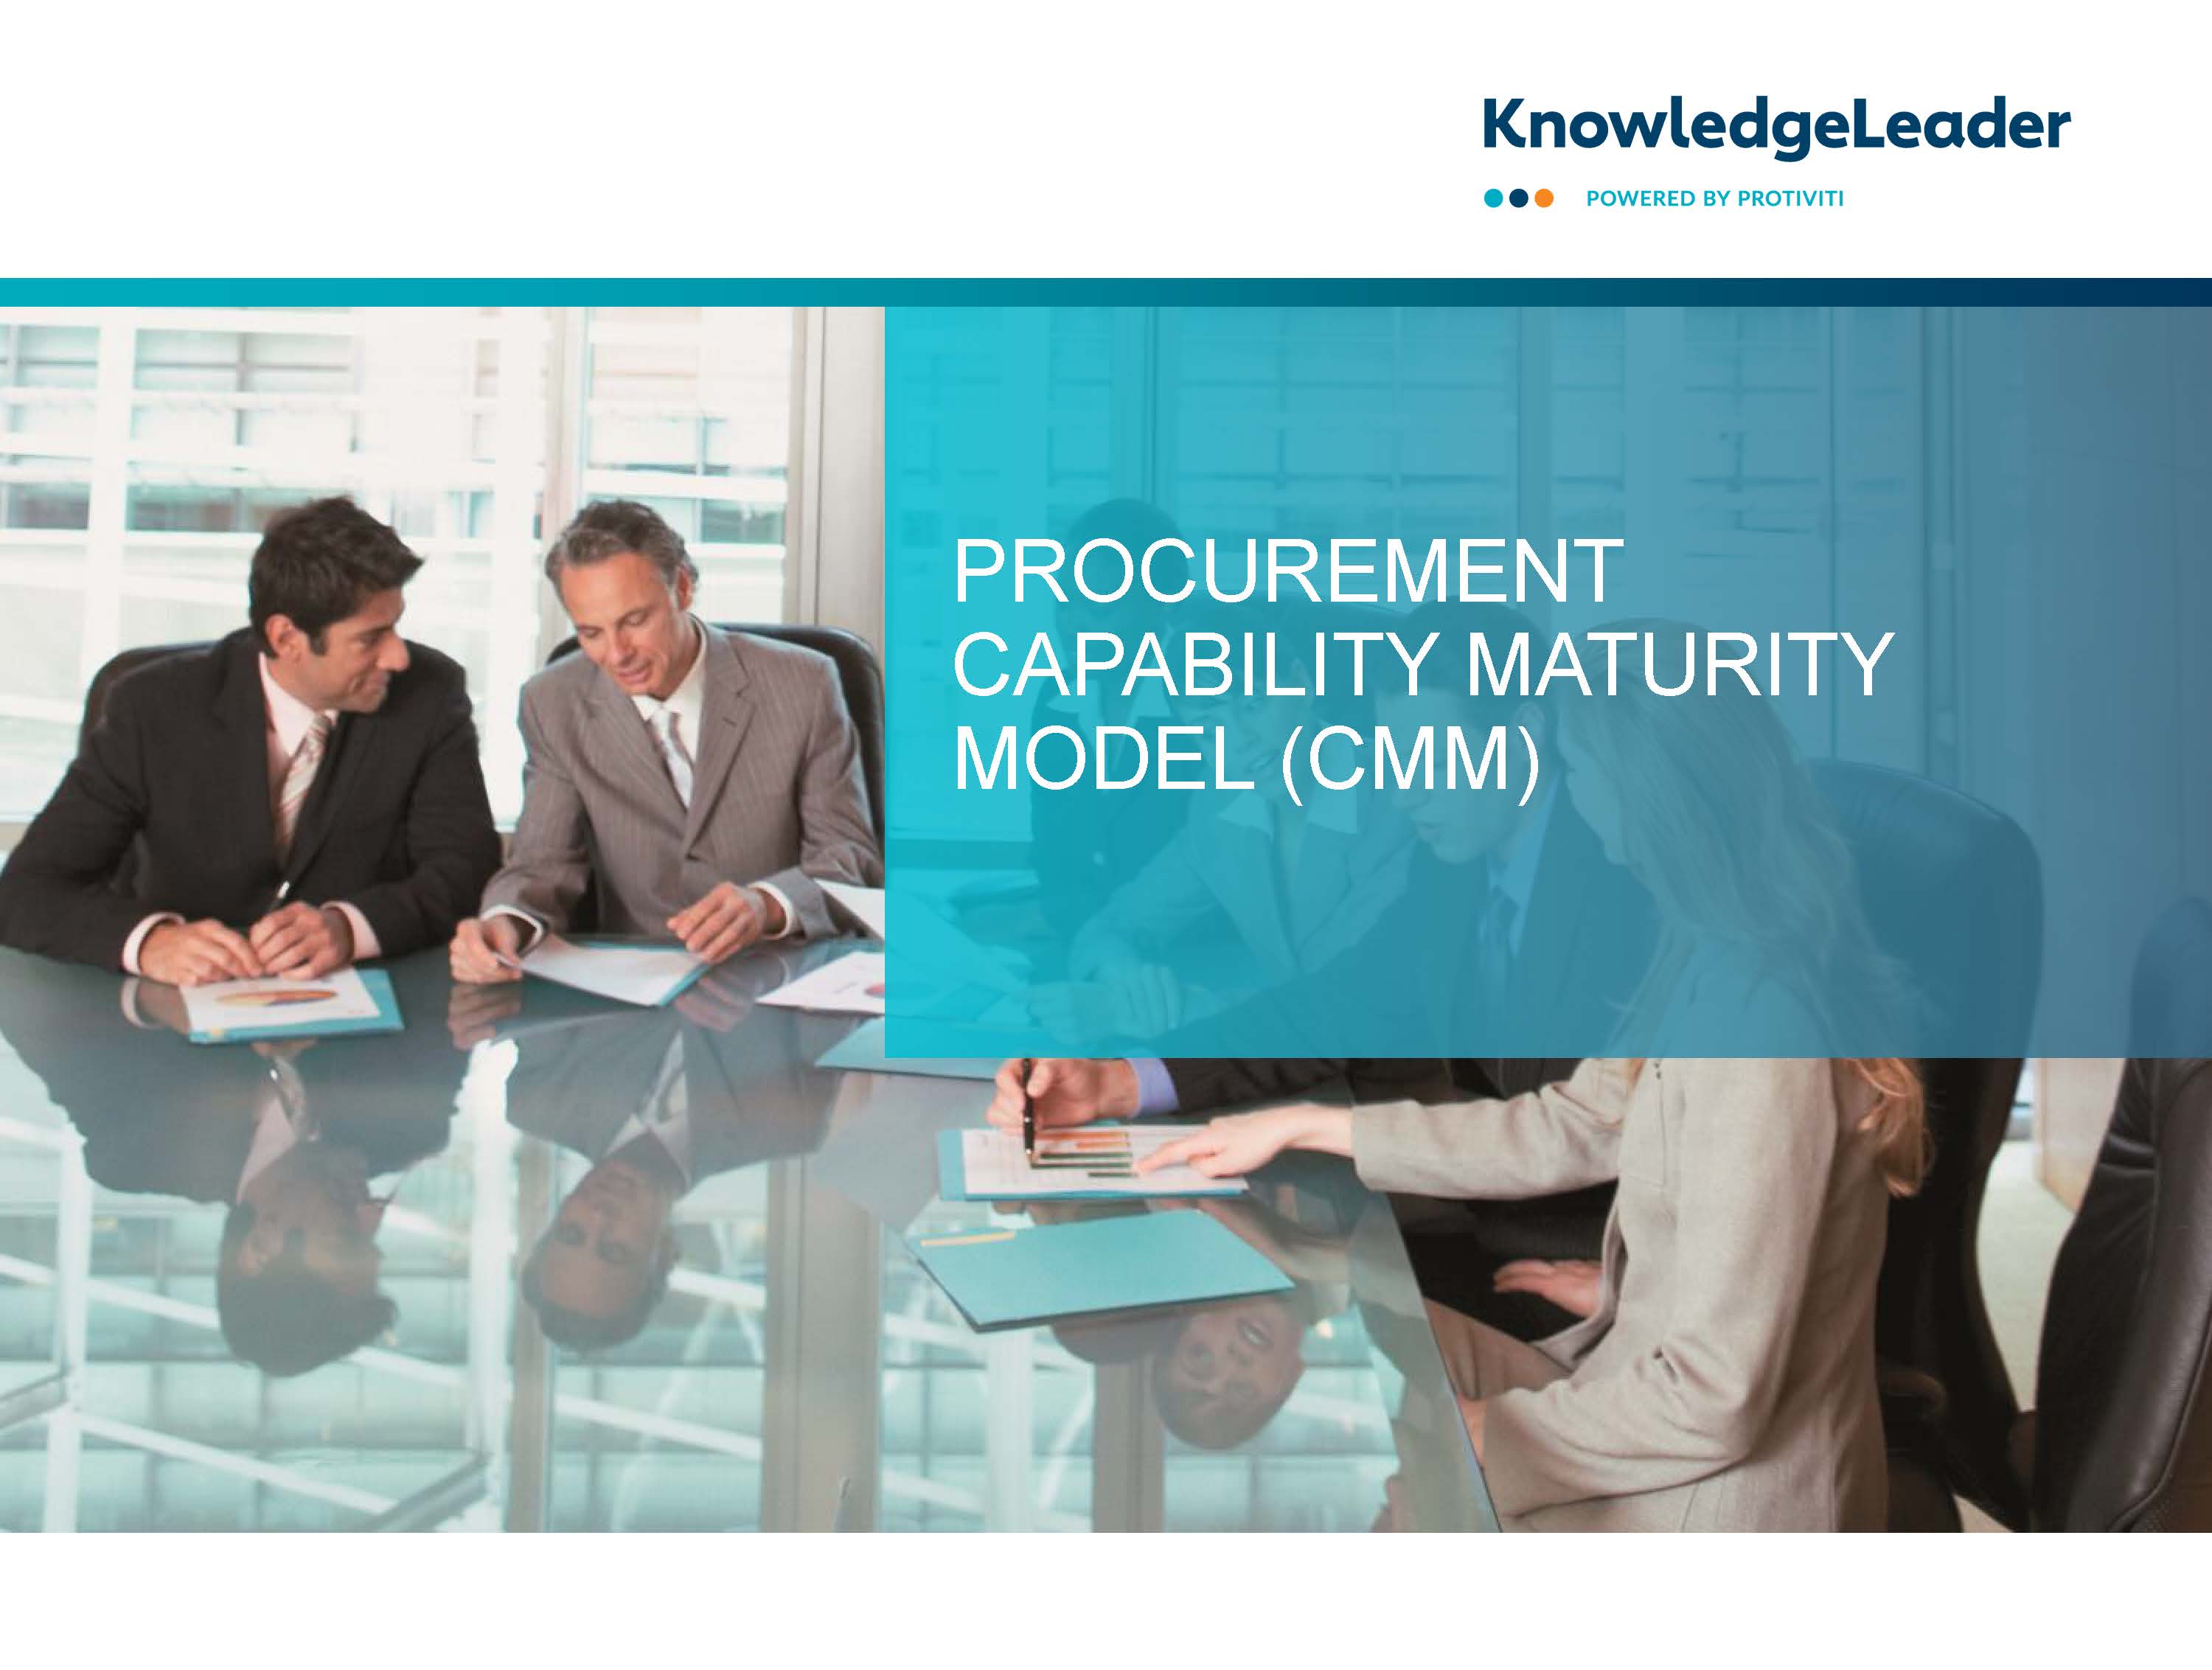 Screenshot of the first page of Procurement Capability Maturity Model (CMM)